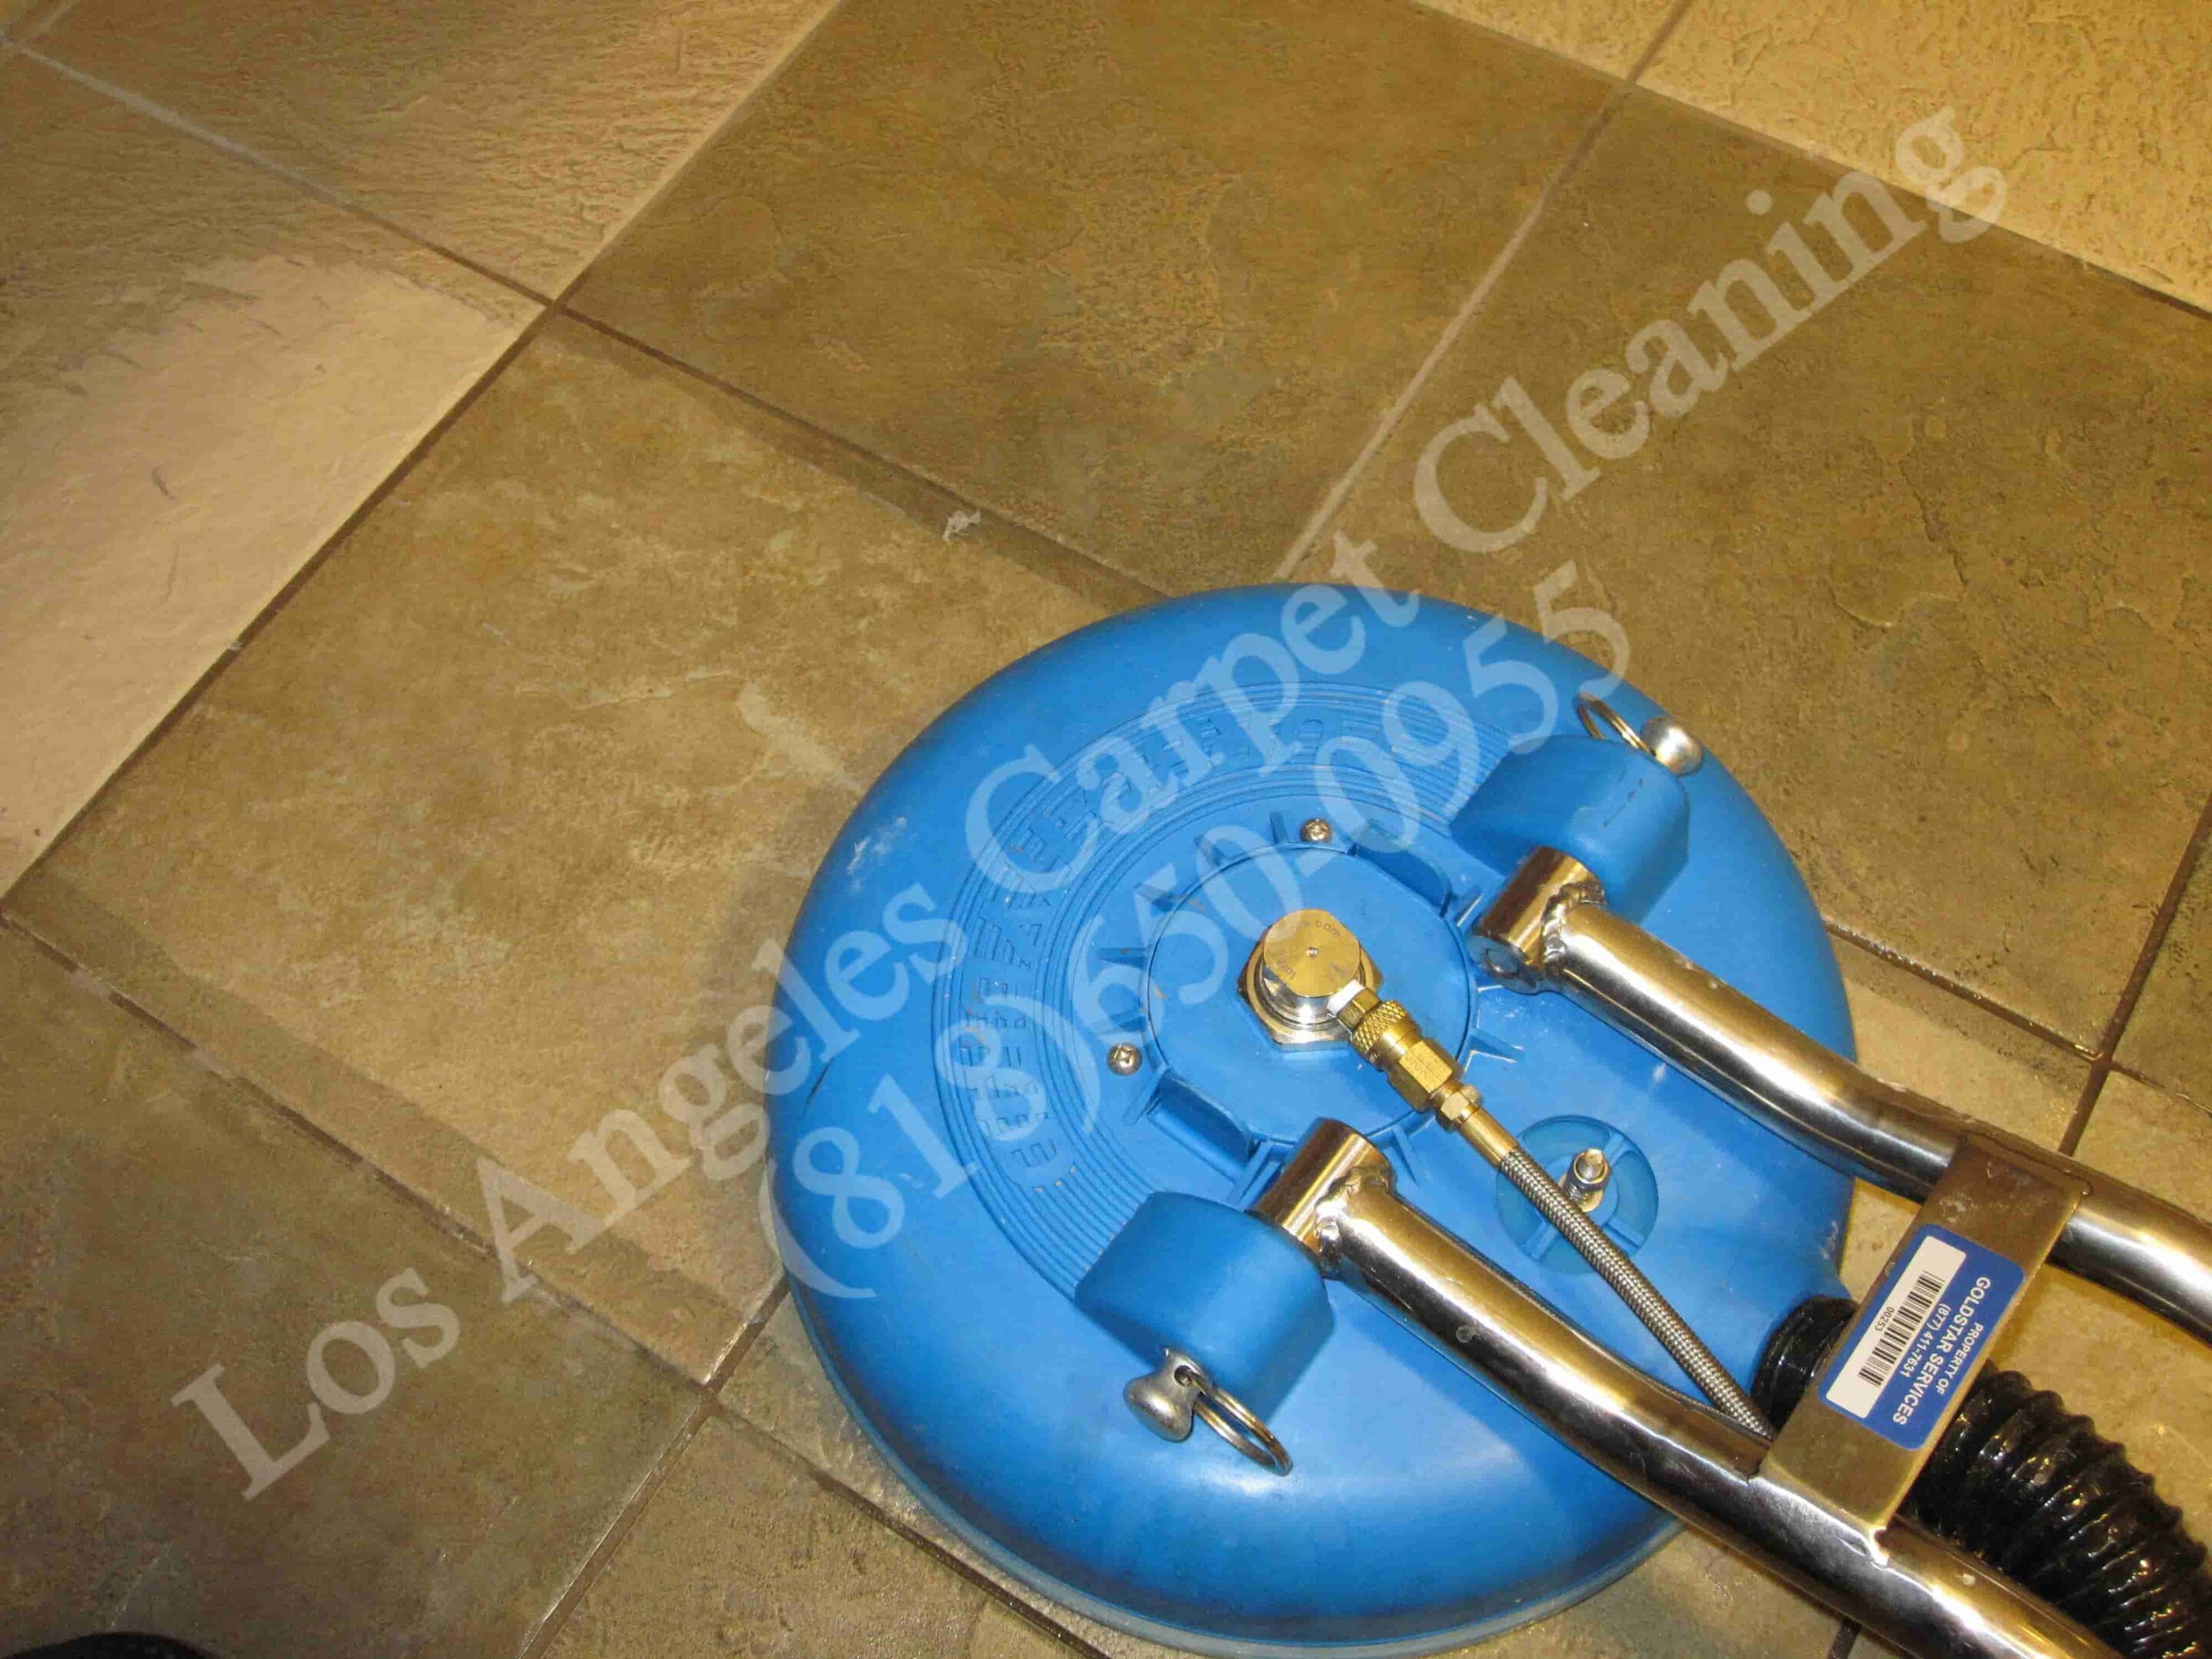 Los Angeles Carpet Cleaning provides the best tile and grout cleaning.